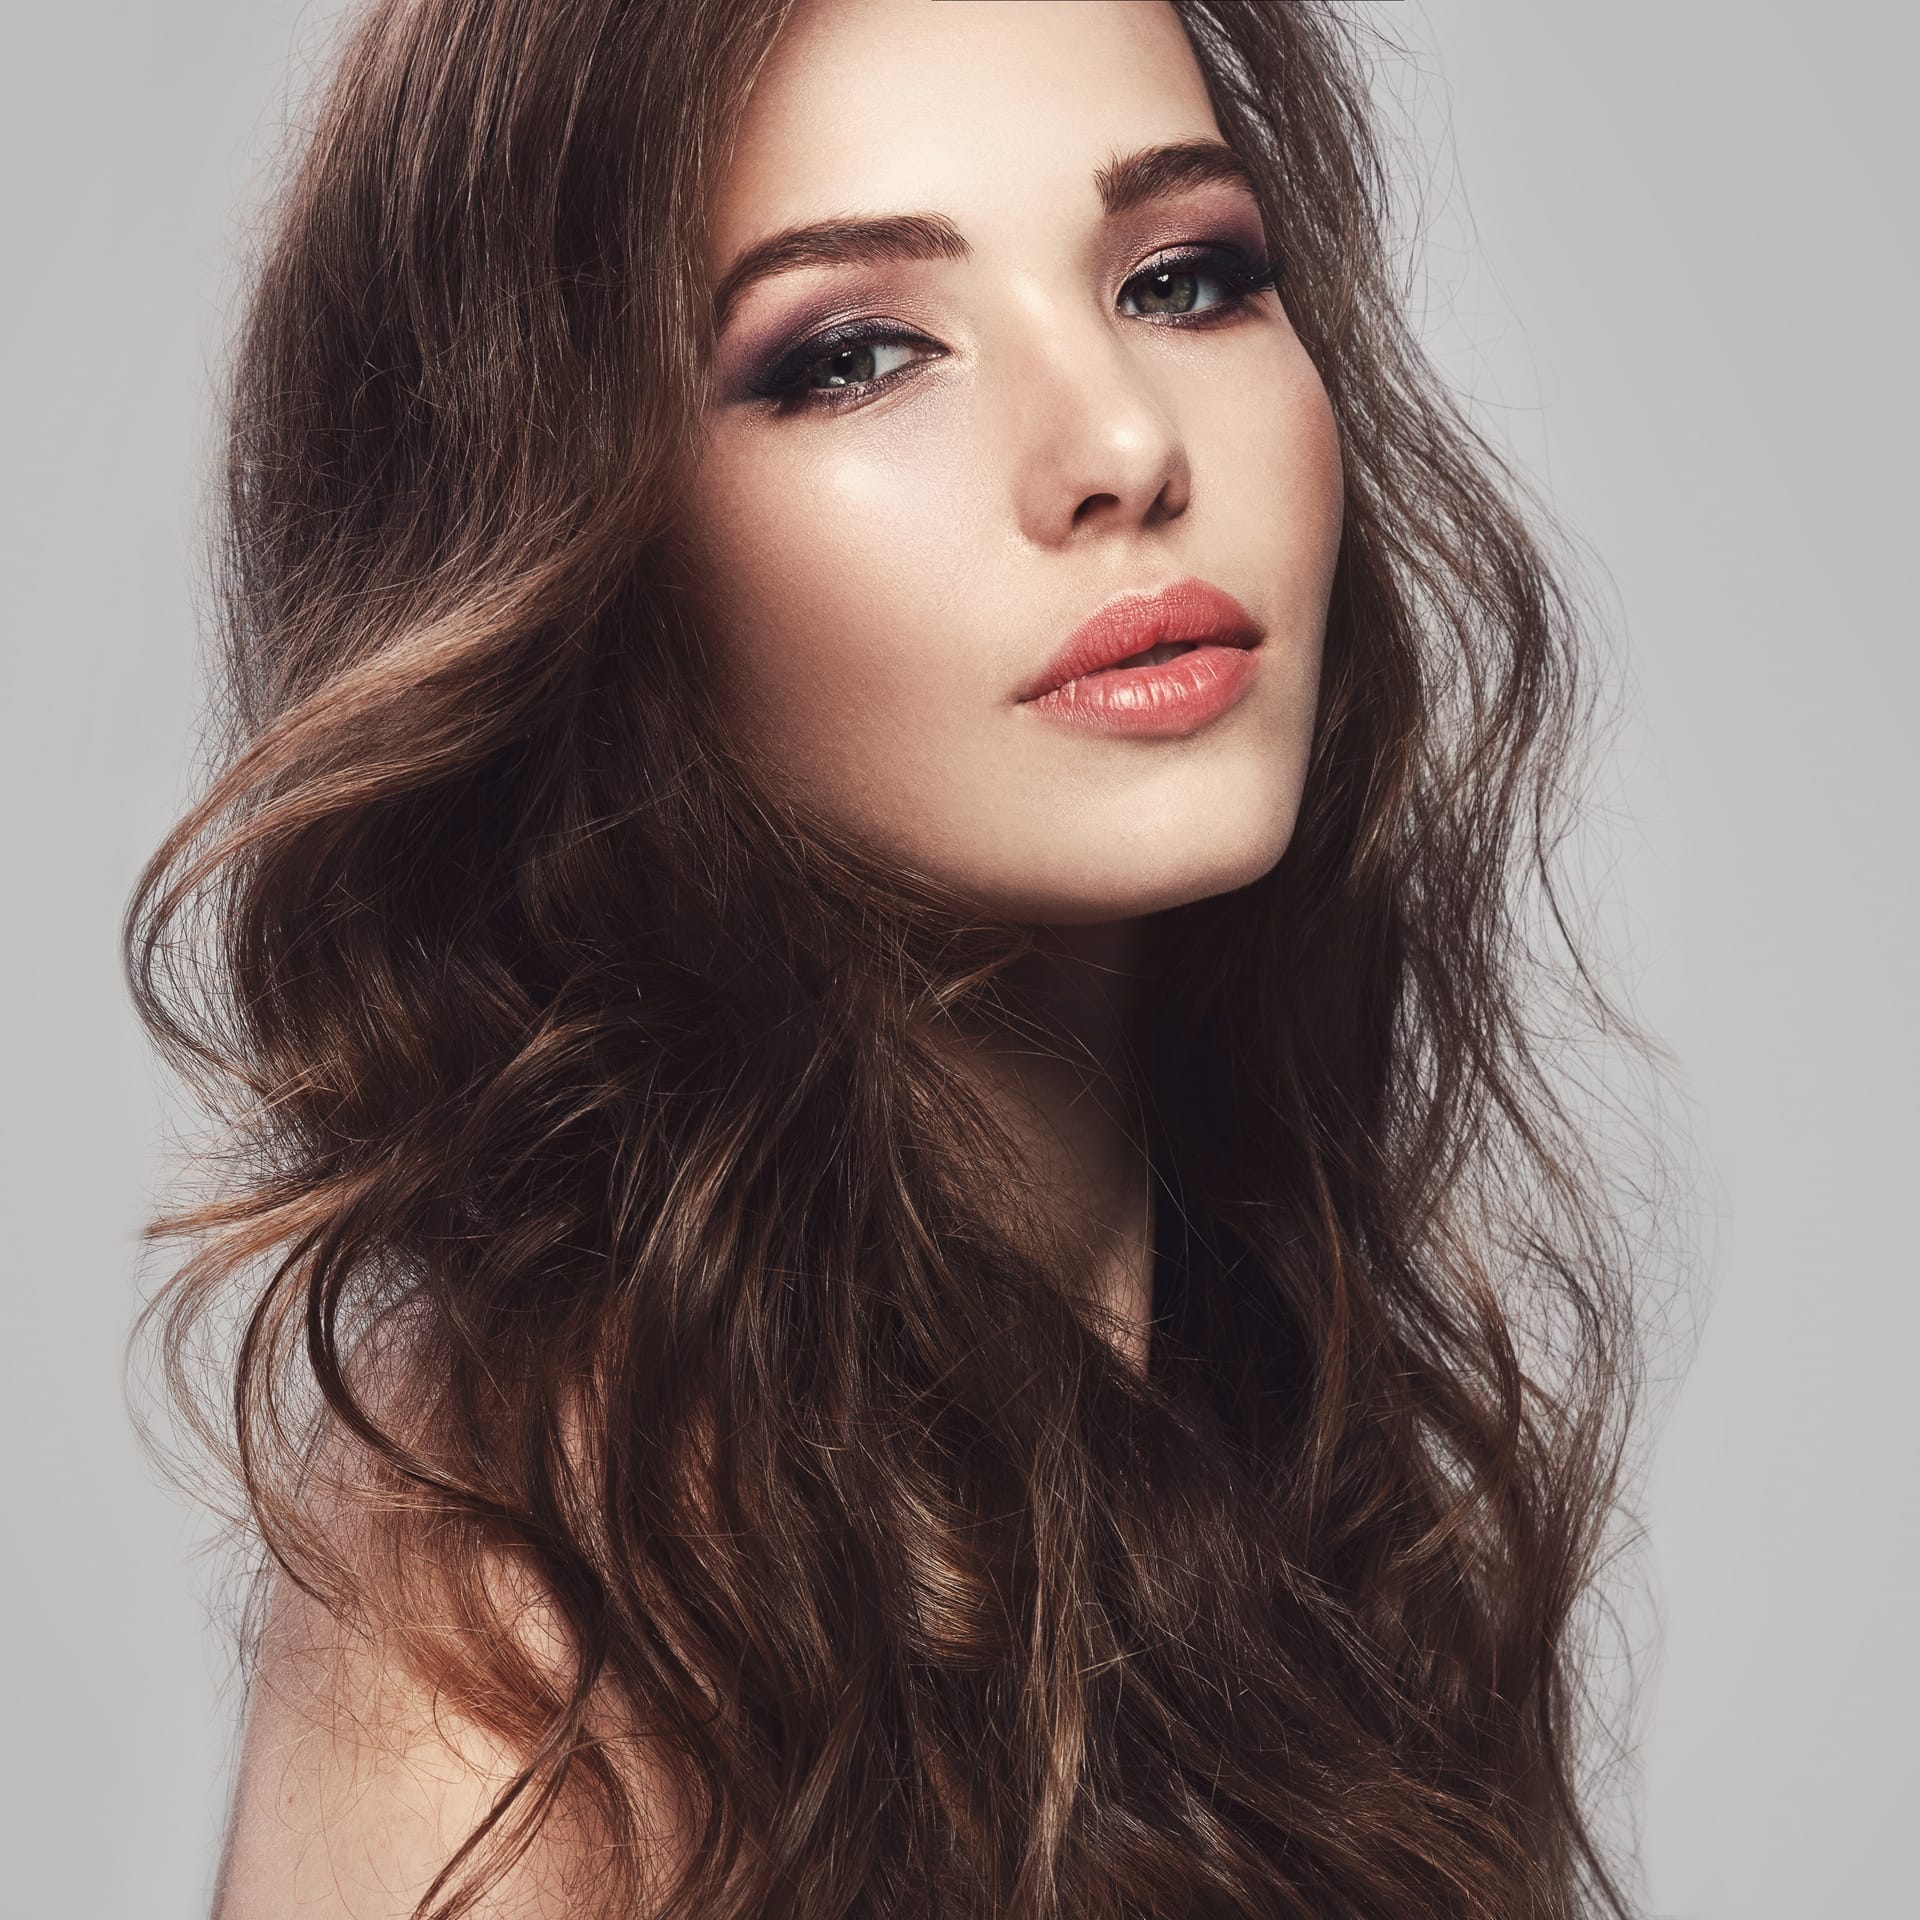 Beautiful young woman with long wavy hair